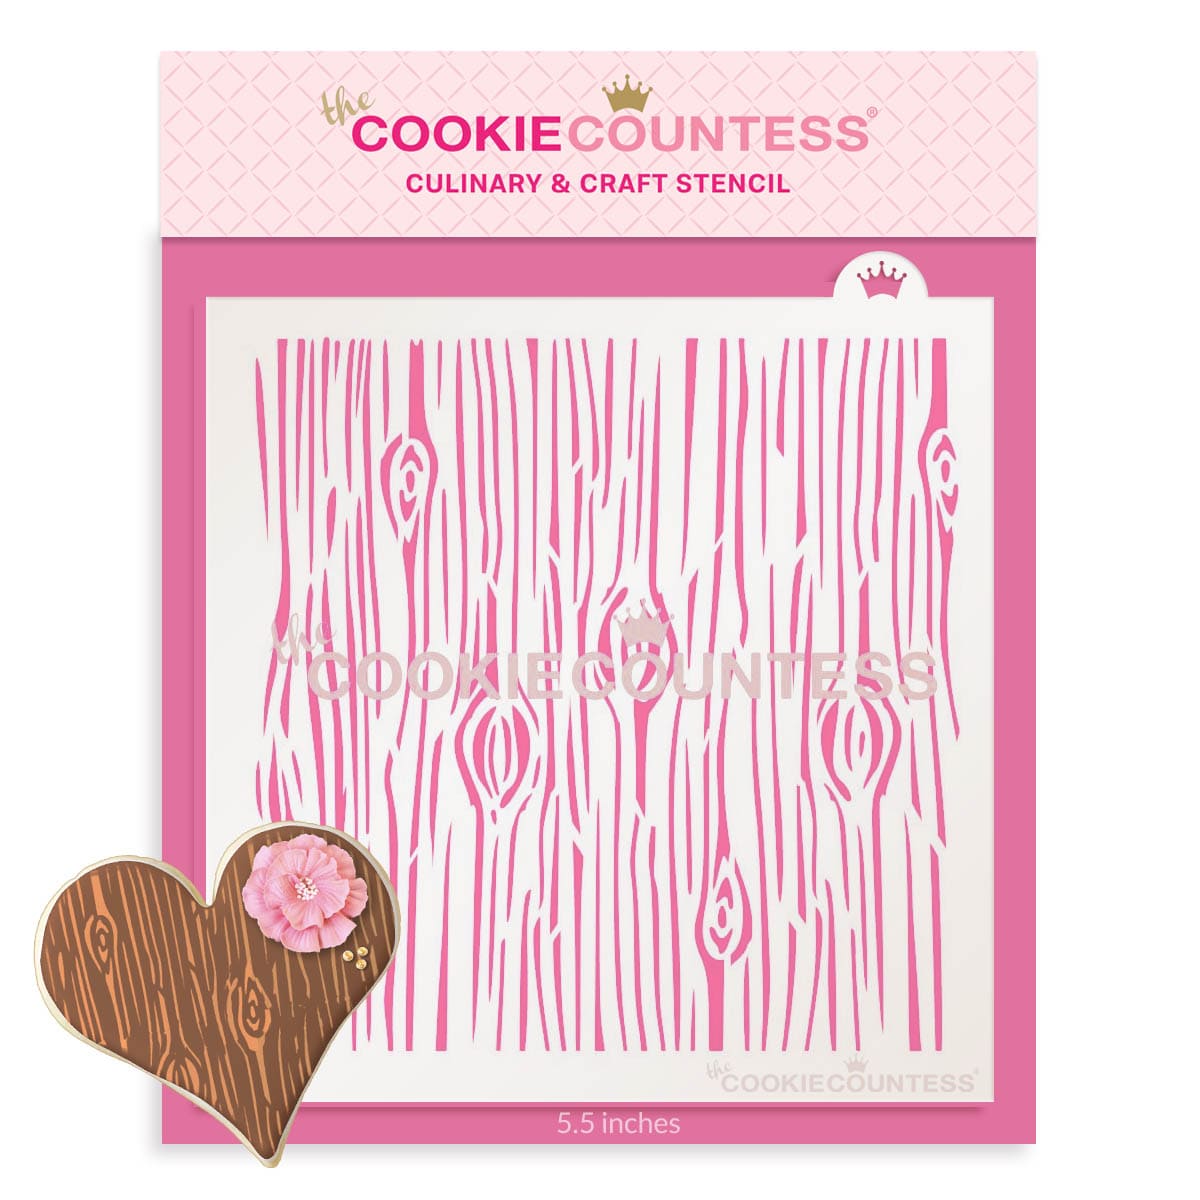 Stencils for Cookies